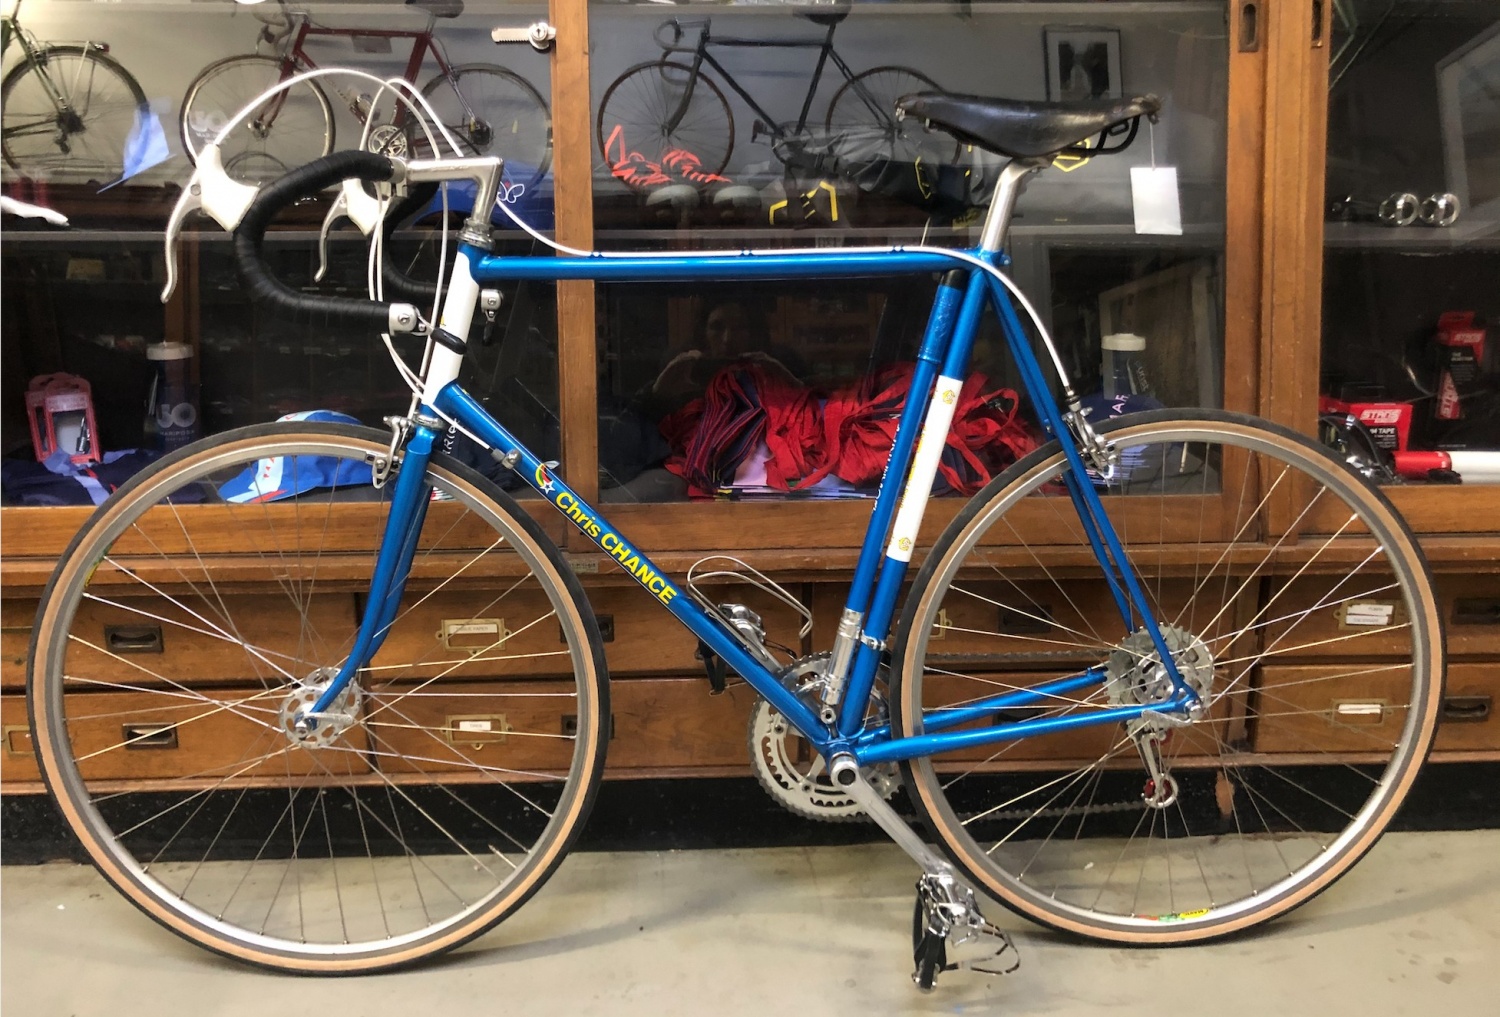 Restoration Feature: 1970s Chris Chance Road Bicycle, USA